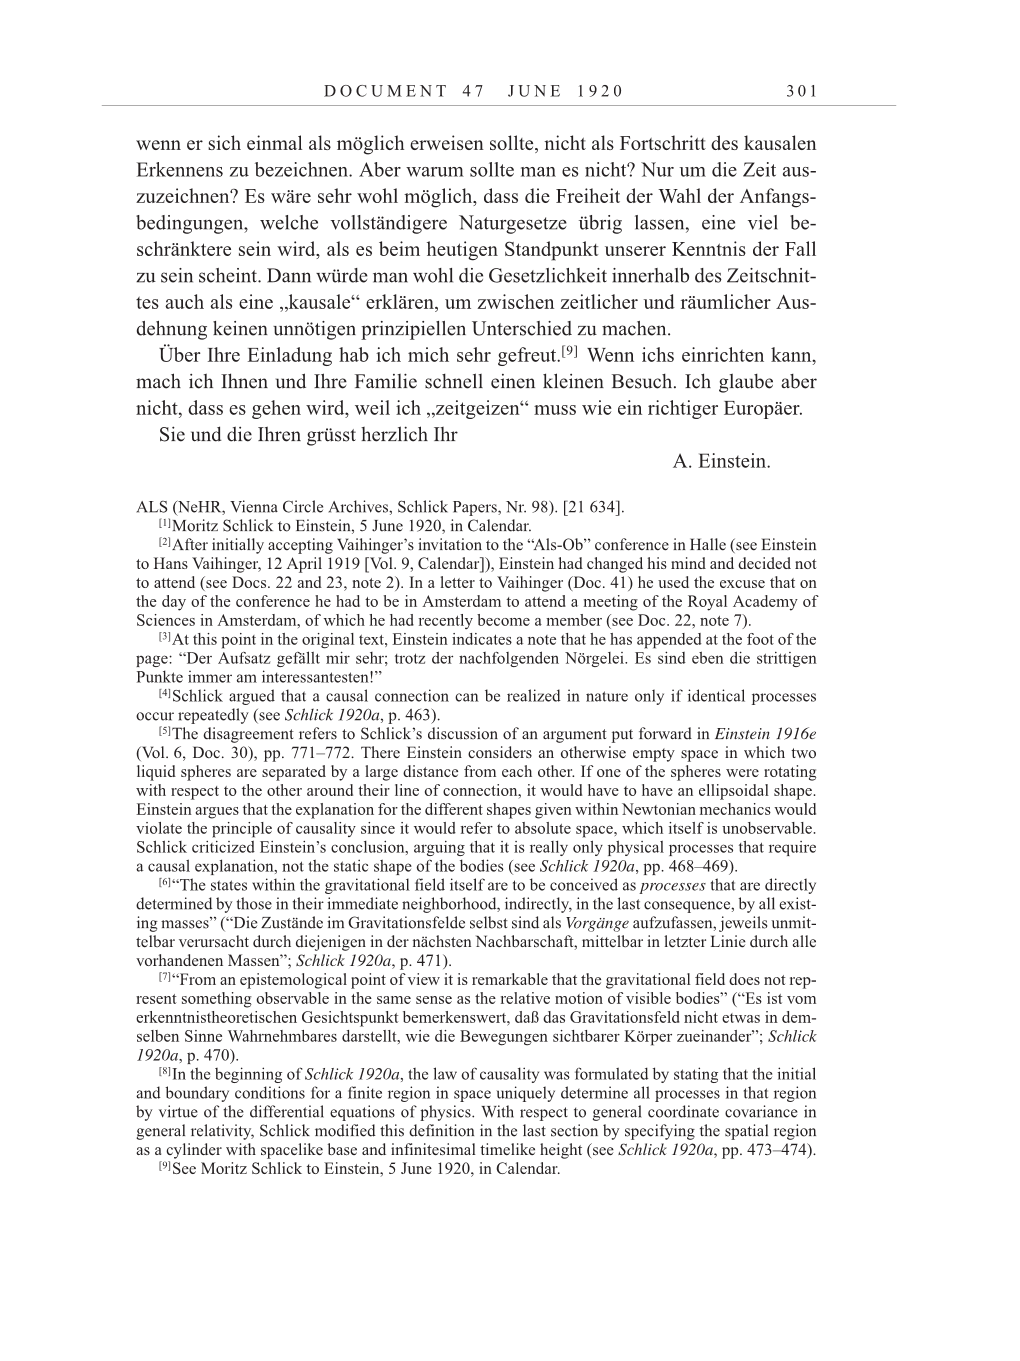 Volume 10: The Berlin Years: Correspondence May-December 1920 / Supplementary Correspondence 1909-1920 page 301